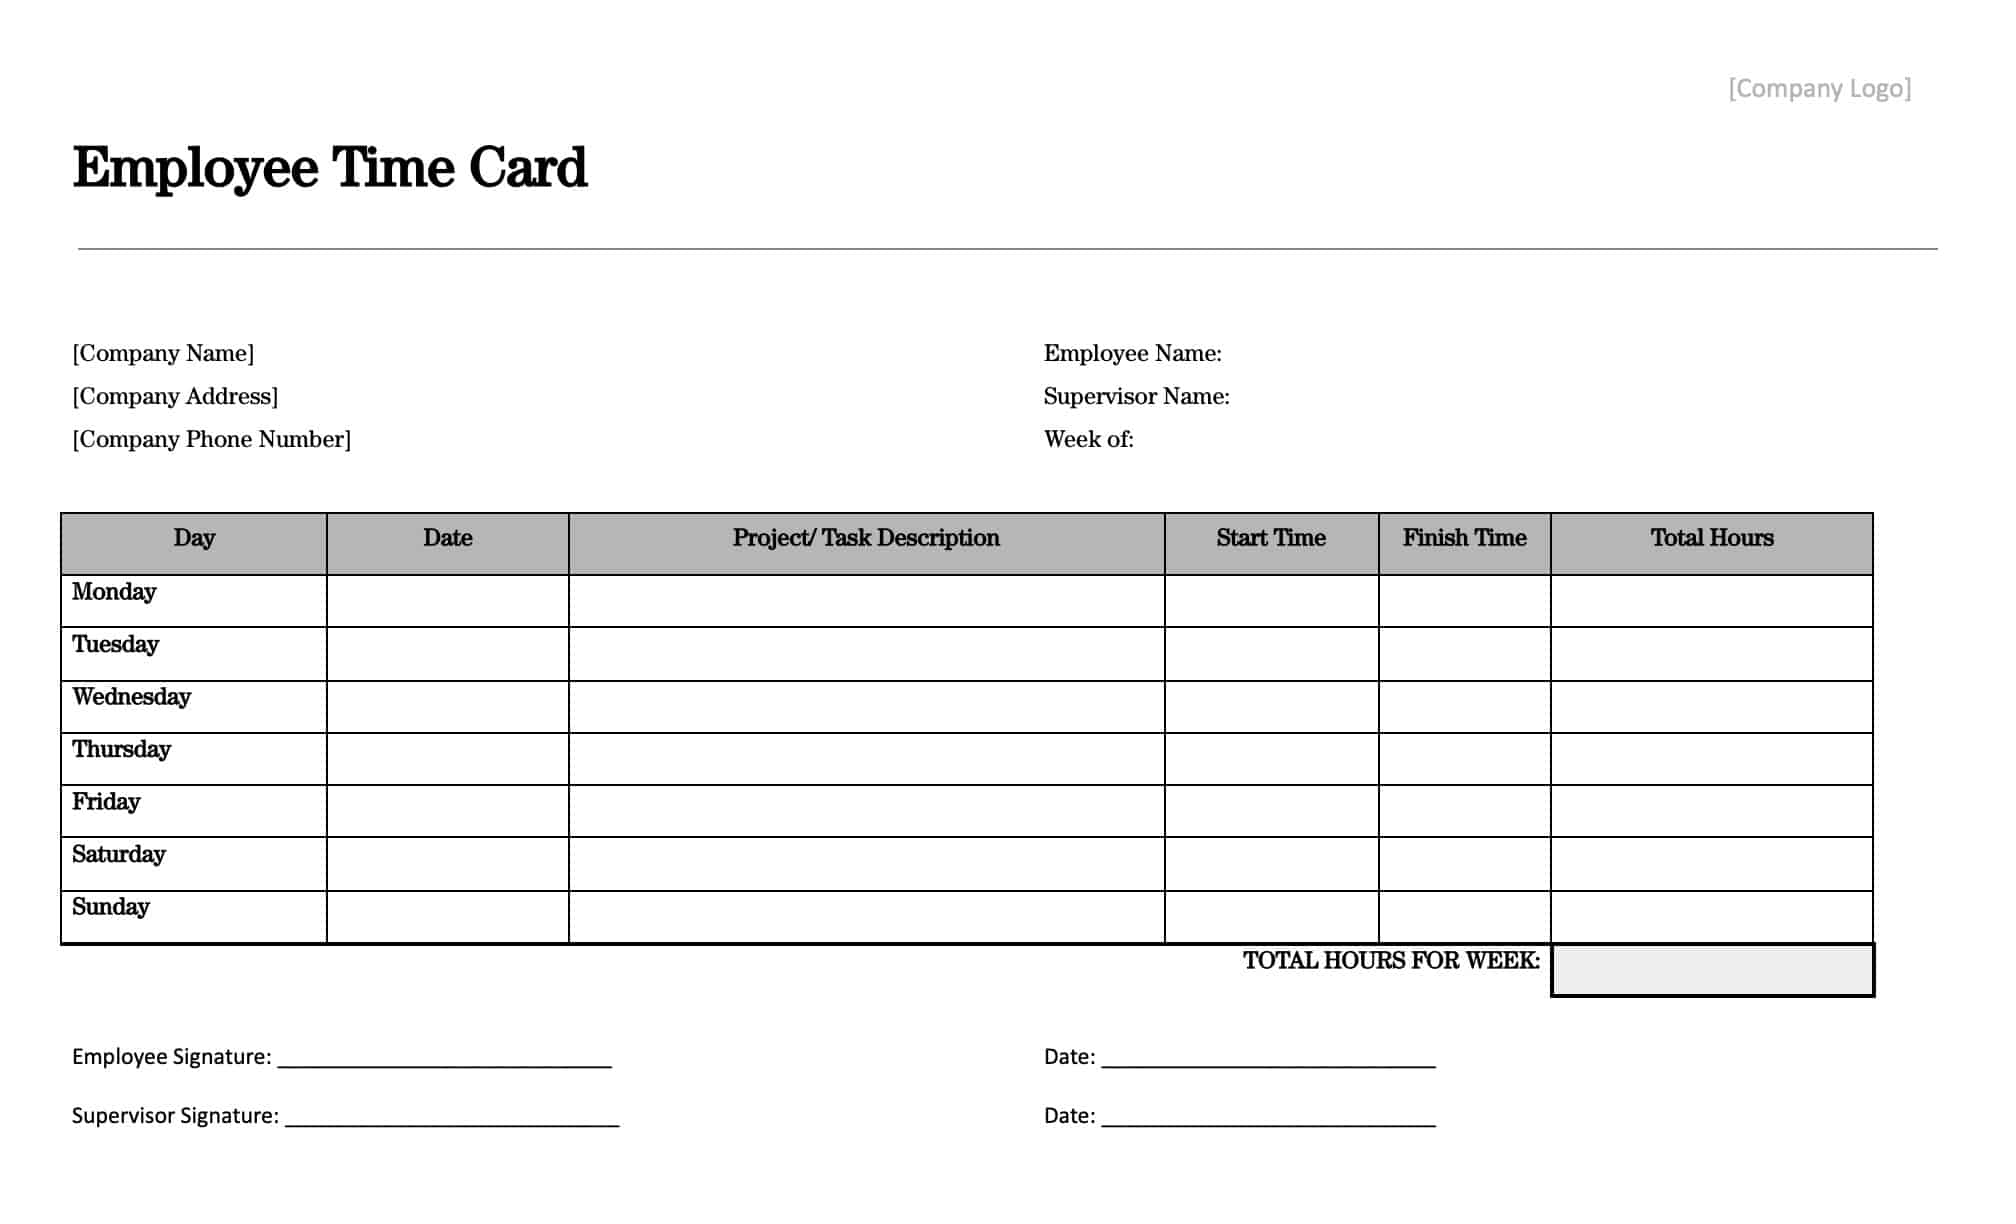 Time Card Templates: Download Print for Free